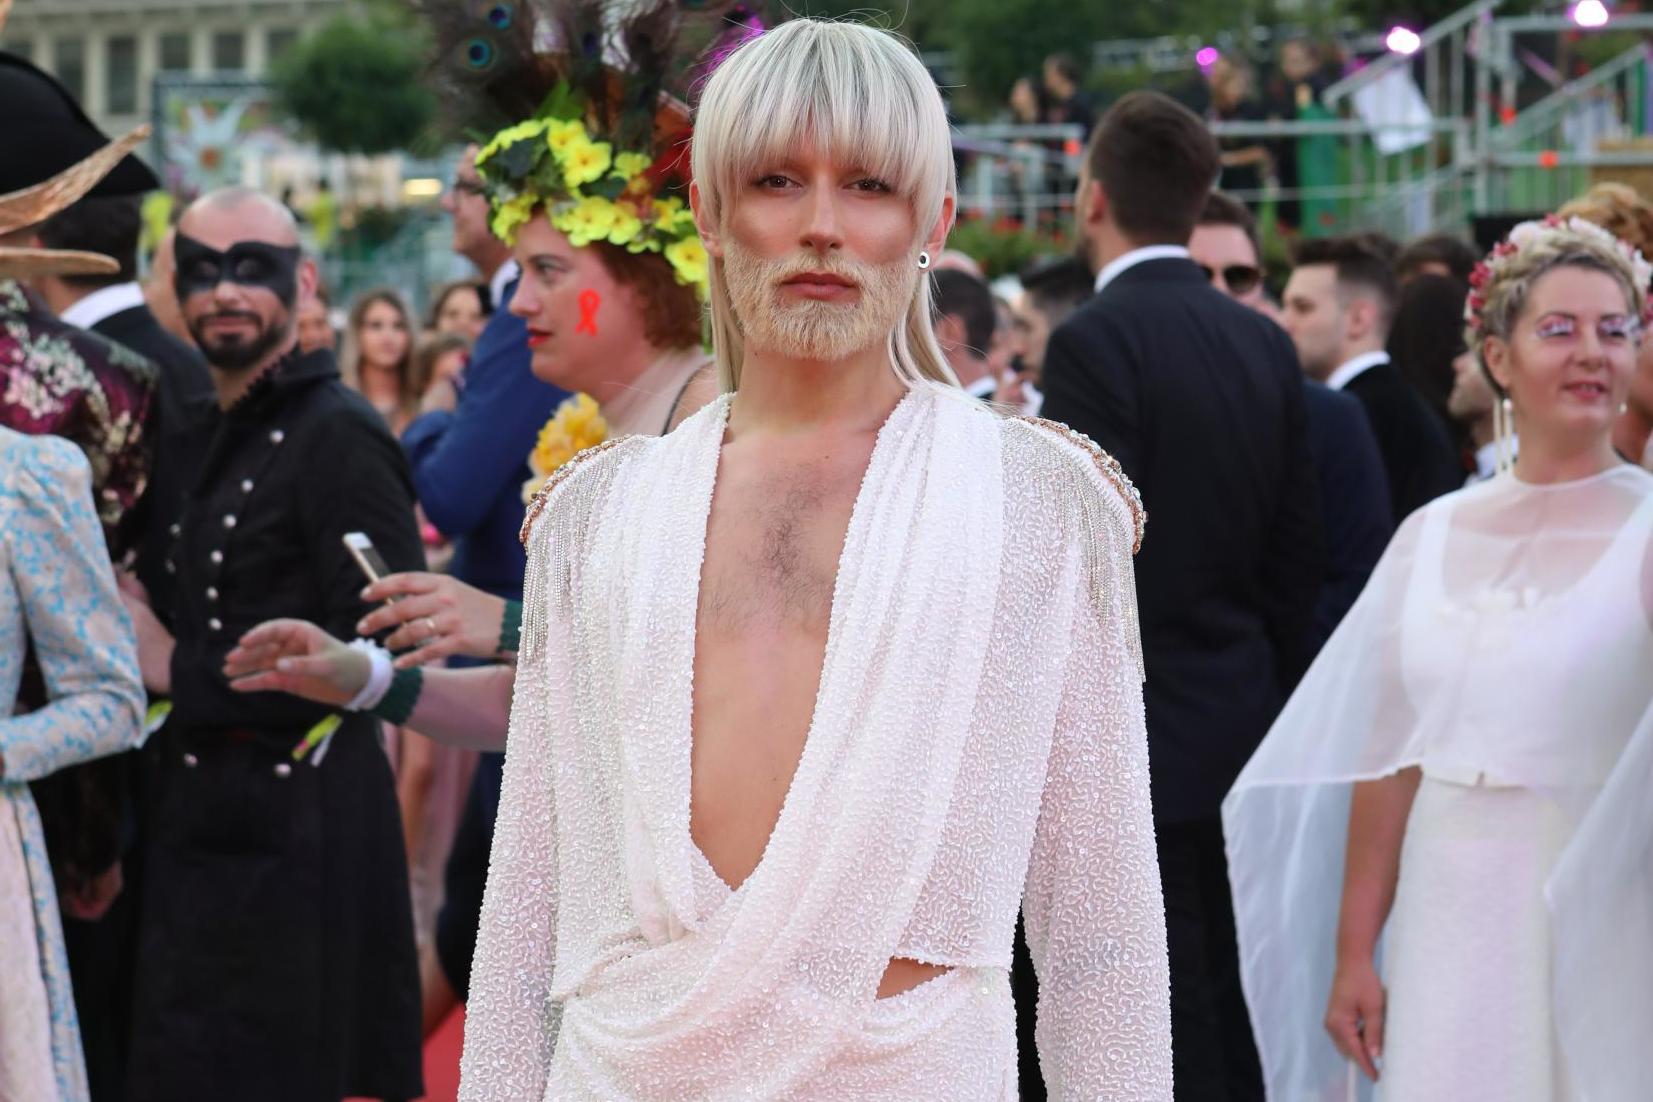 Conchita Wurst on the red carpet at the Life Ball. Credit: Life Ball/ C. Stephan Bruckler